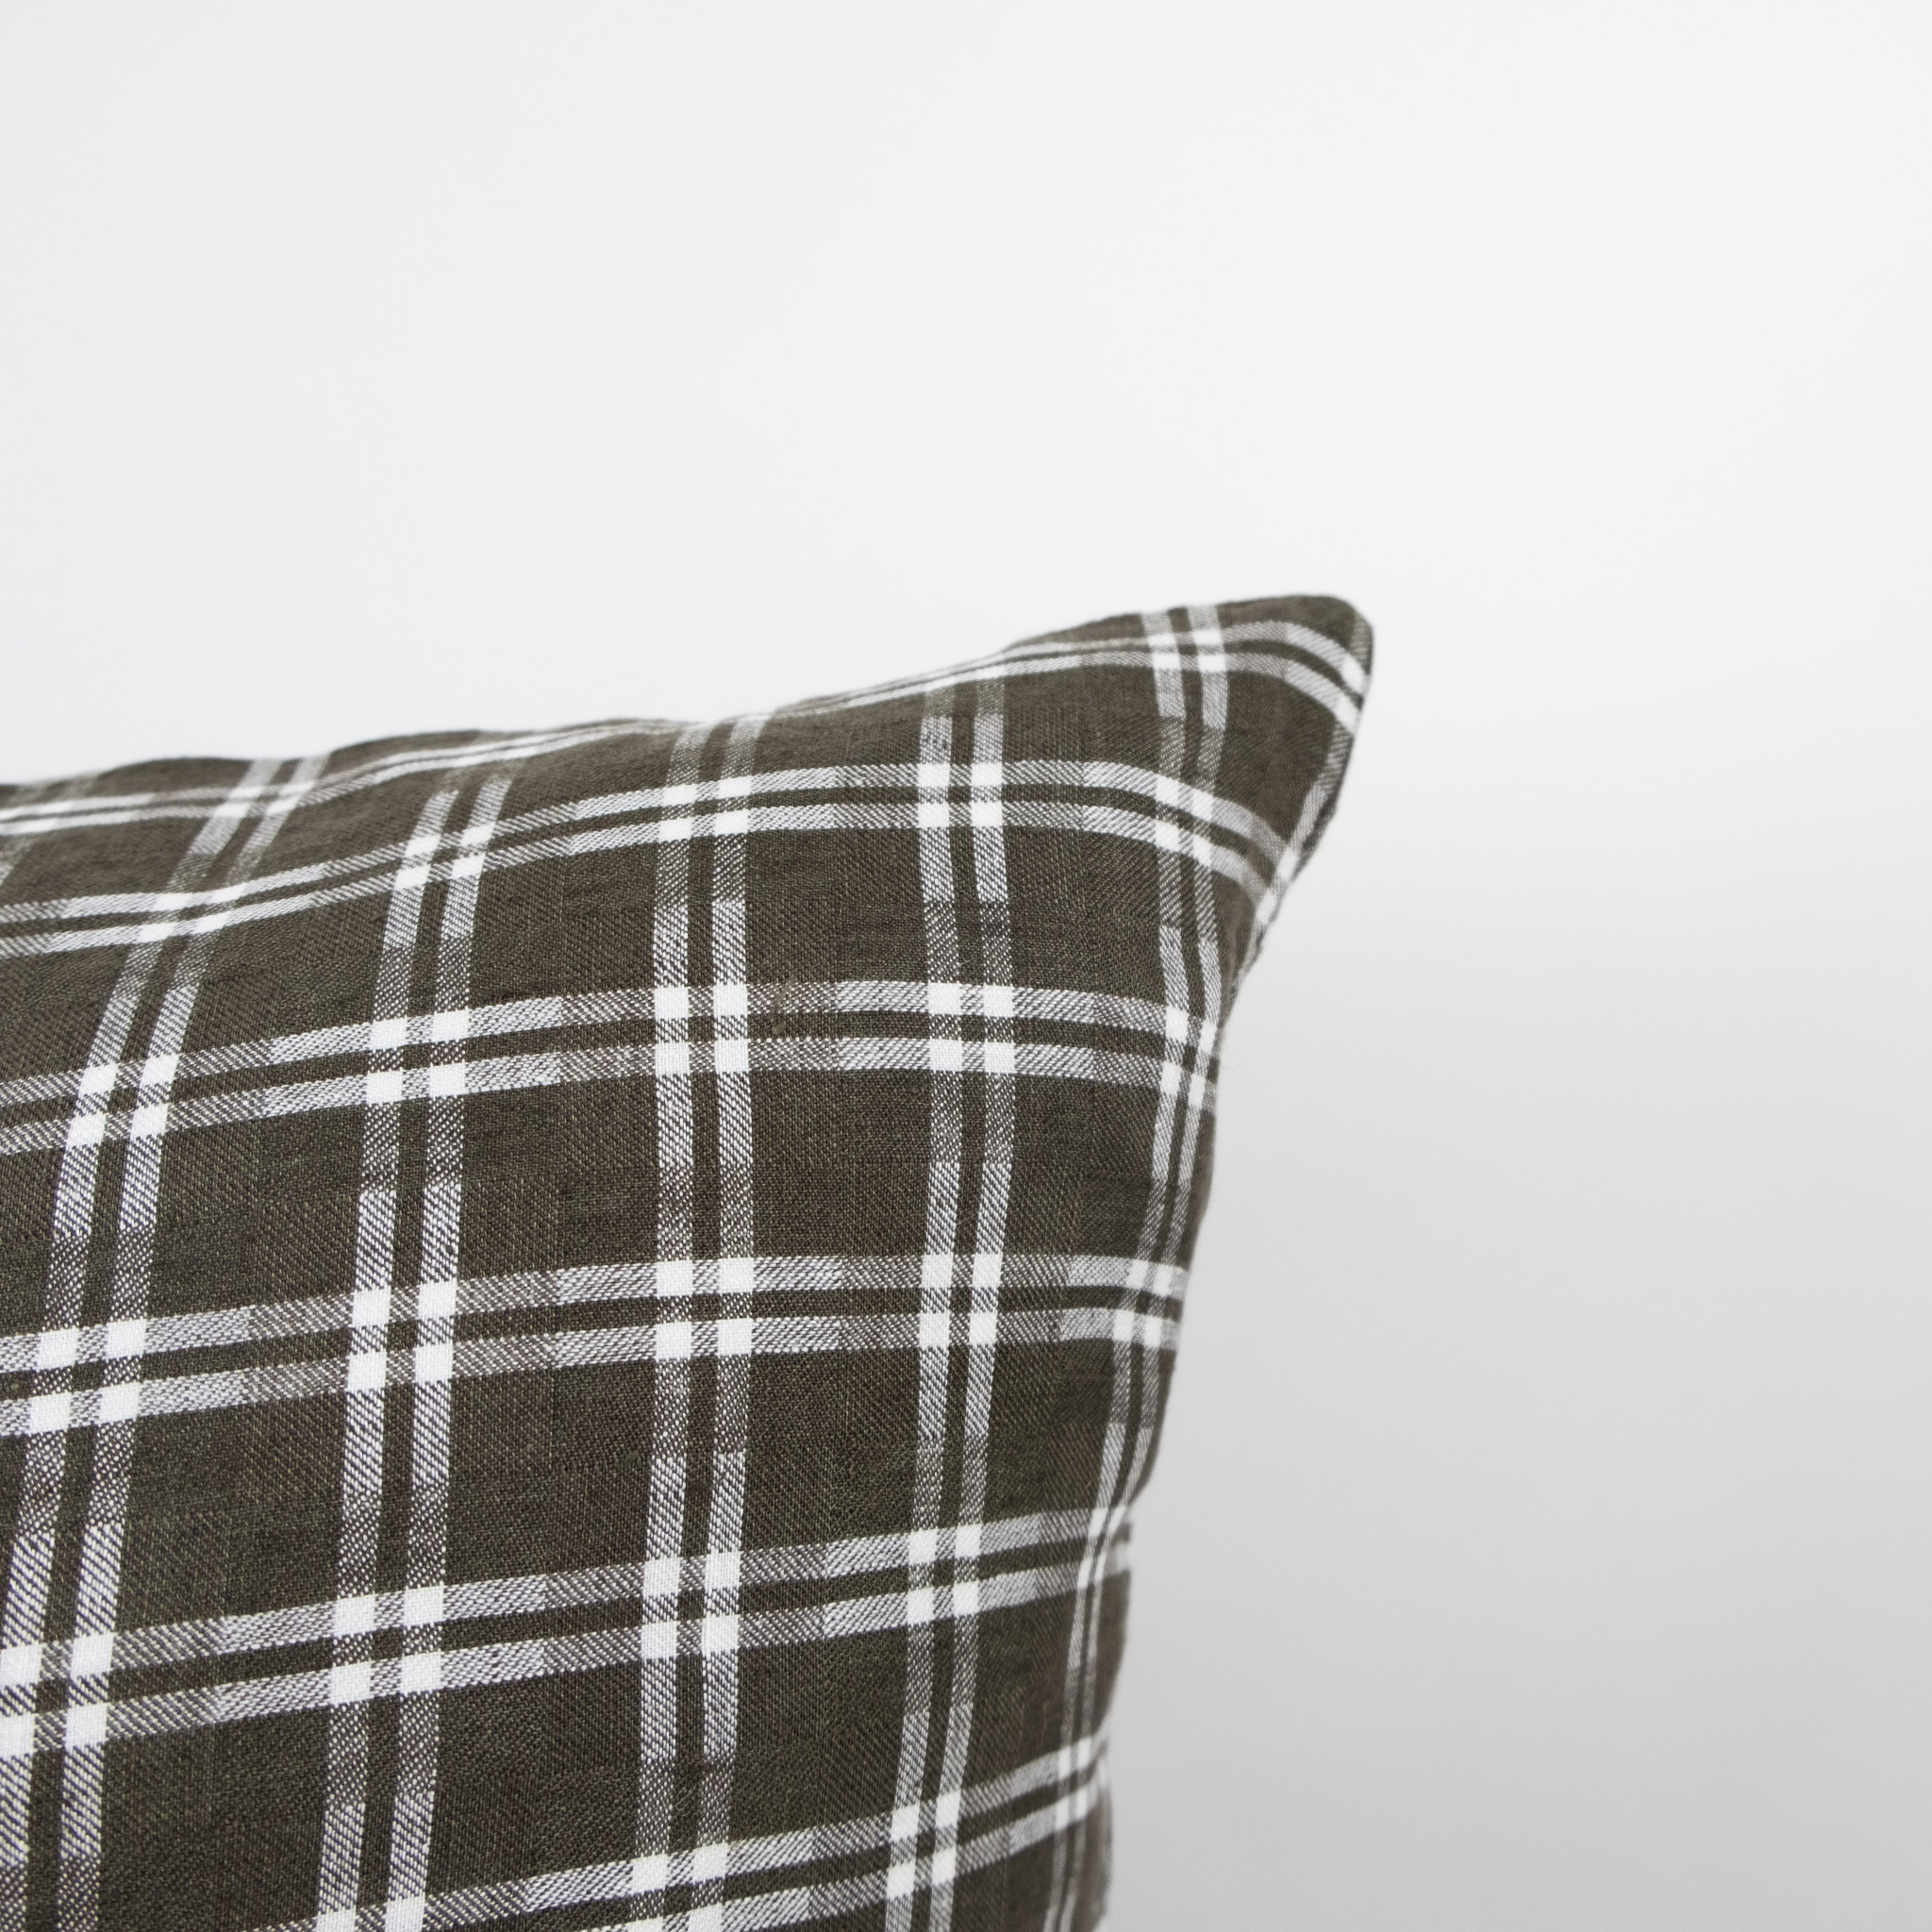 French Linen Pillow -  Kaki Check - with Down Insert 25"